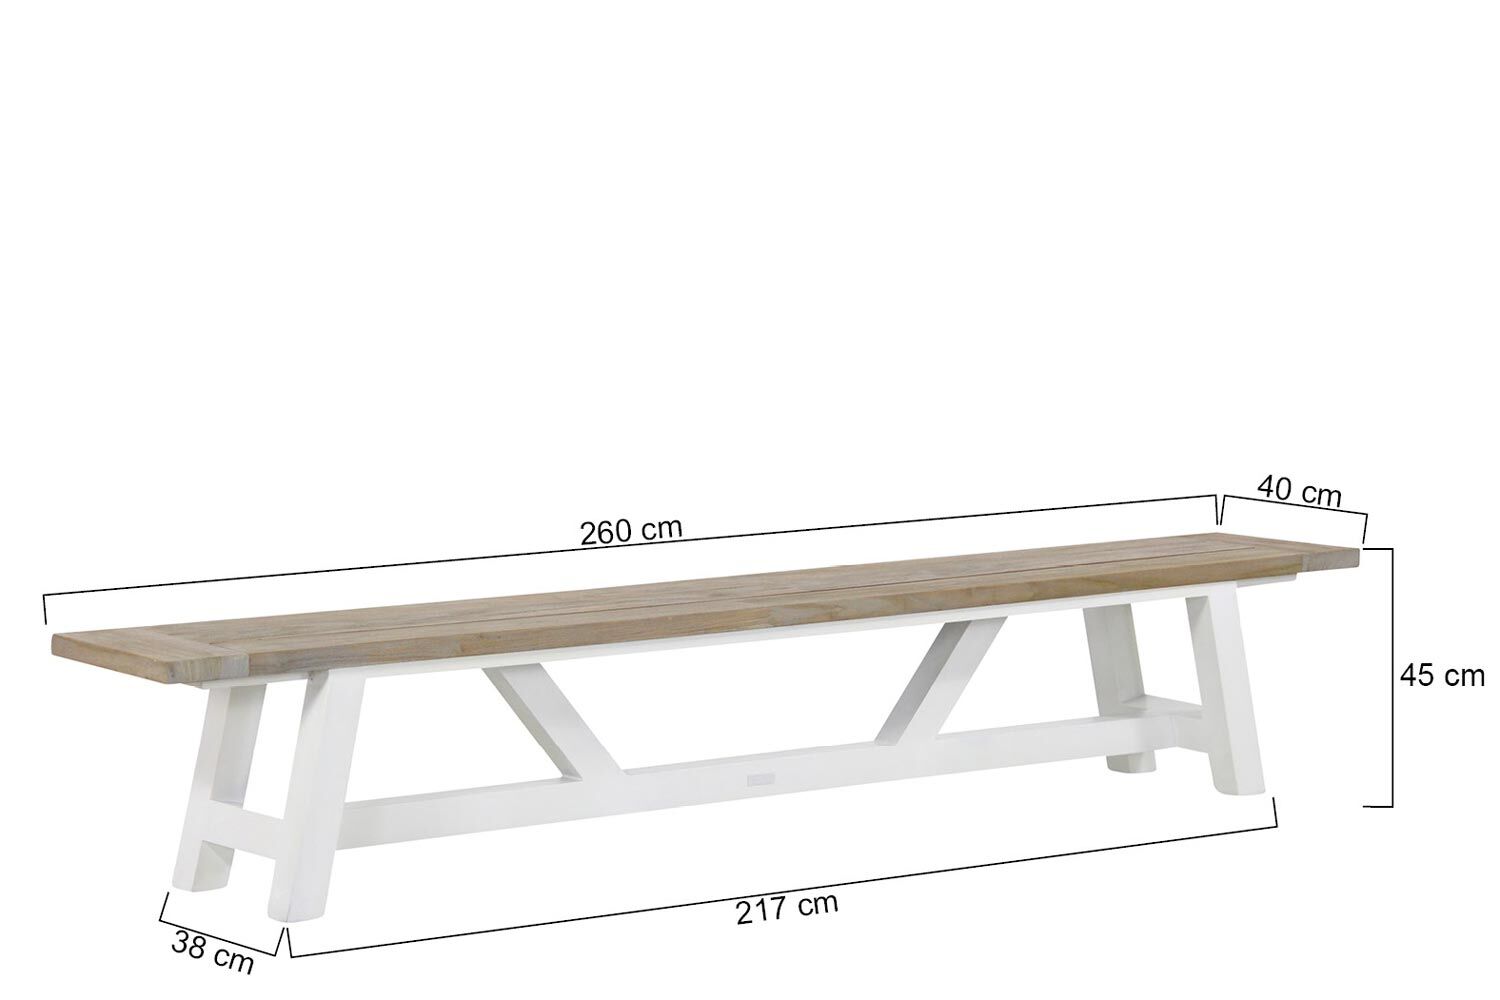 Lifestyle Dolphin/Florence 260 cm picknick tuinset 5-delig